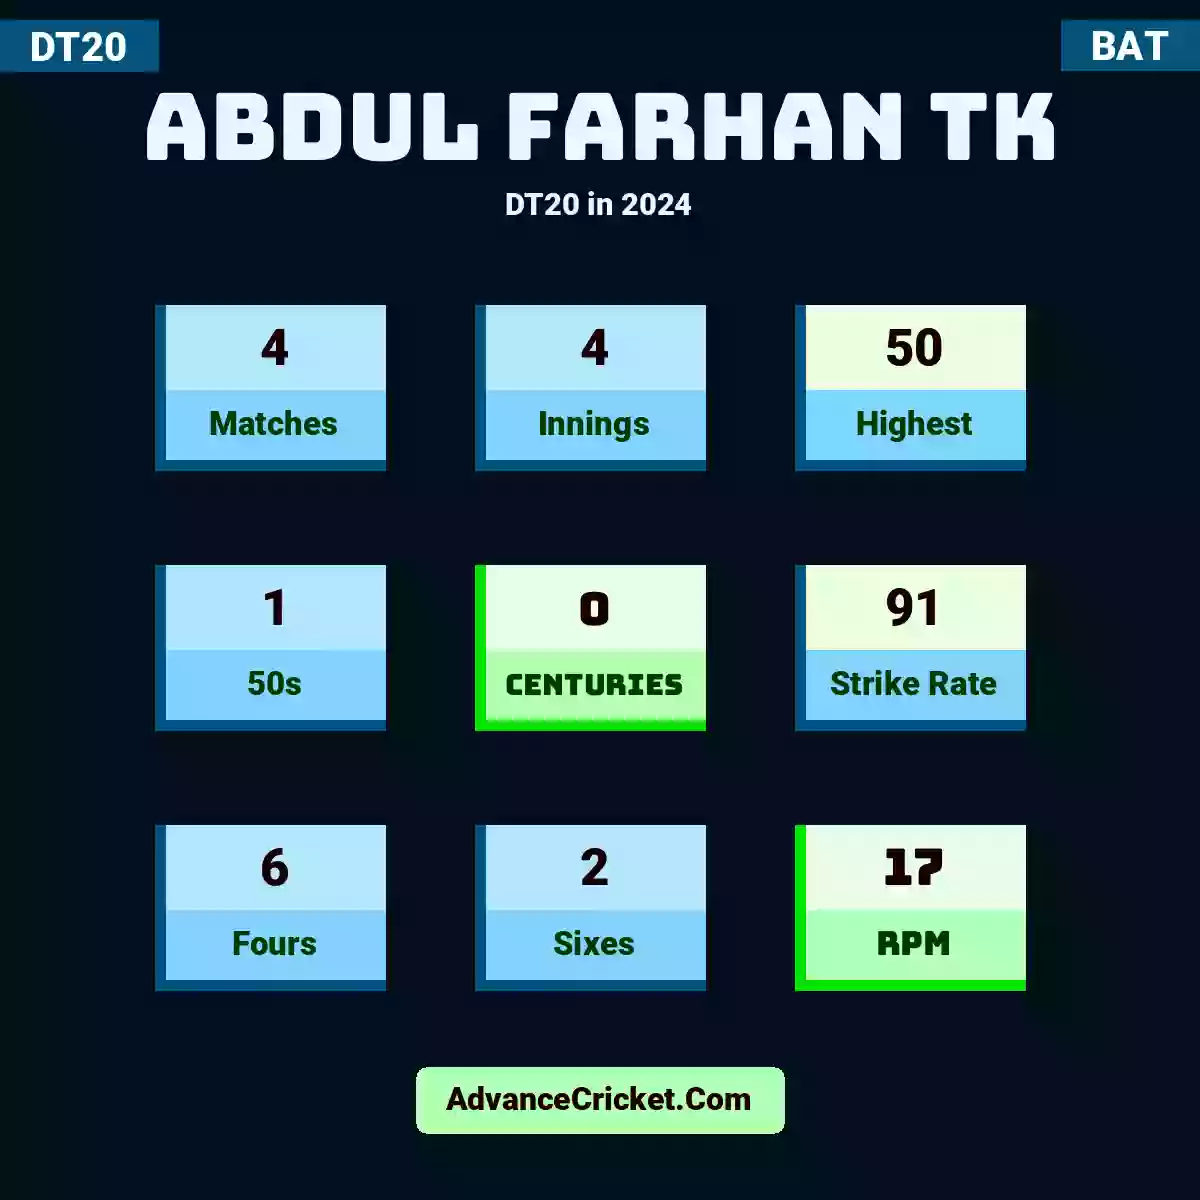 Abdul Farhan TK DT20  in 2024, Abdul Farhan TK played 4 matches, scored 50 runs as highest, 1 half-centuries, and 0 centuries, with a strike rate of 91. A.Farhan.TK hit 6 fours and 2 sixes, with an RPM of 17.